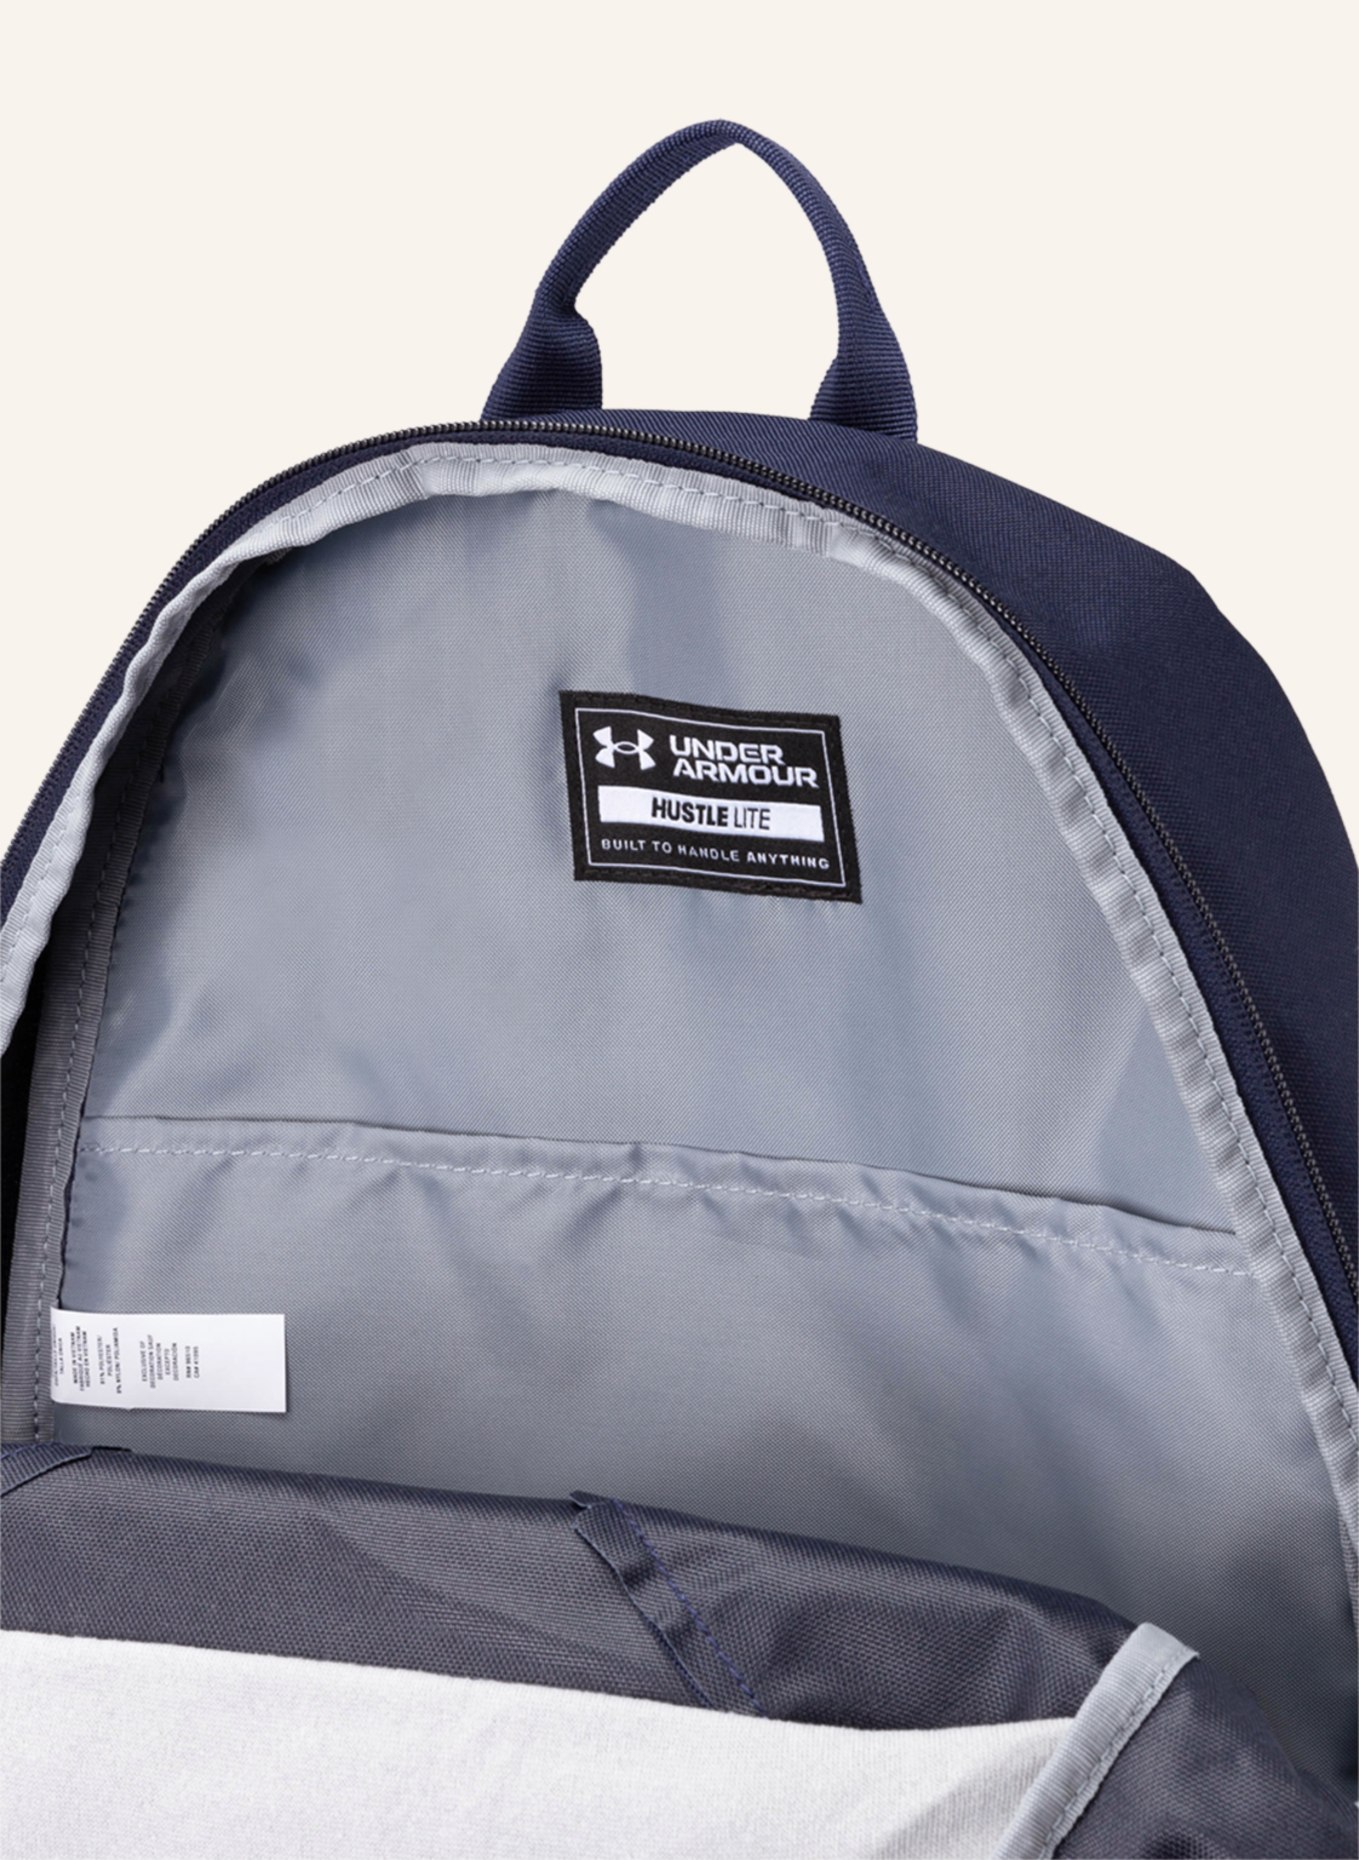 UNDER ARMOUR Backpack HUSTLE LITE with laptop compartment, Color: DARK BLUE (Image 3)